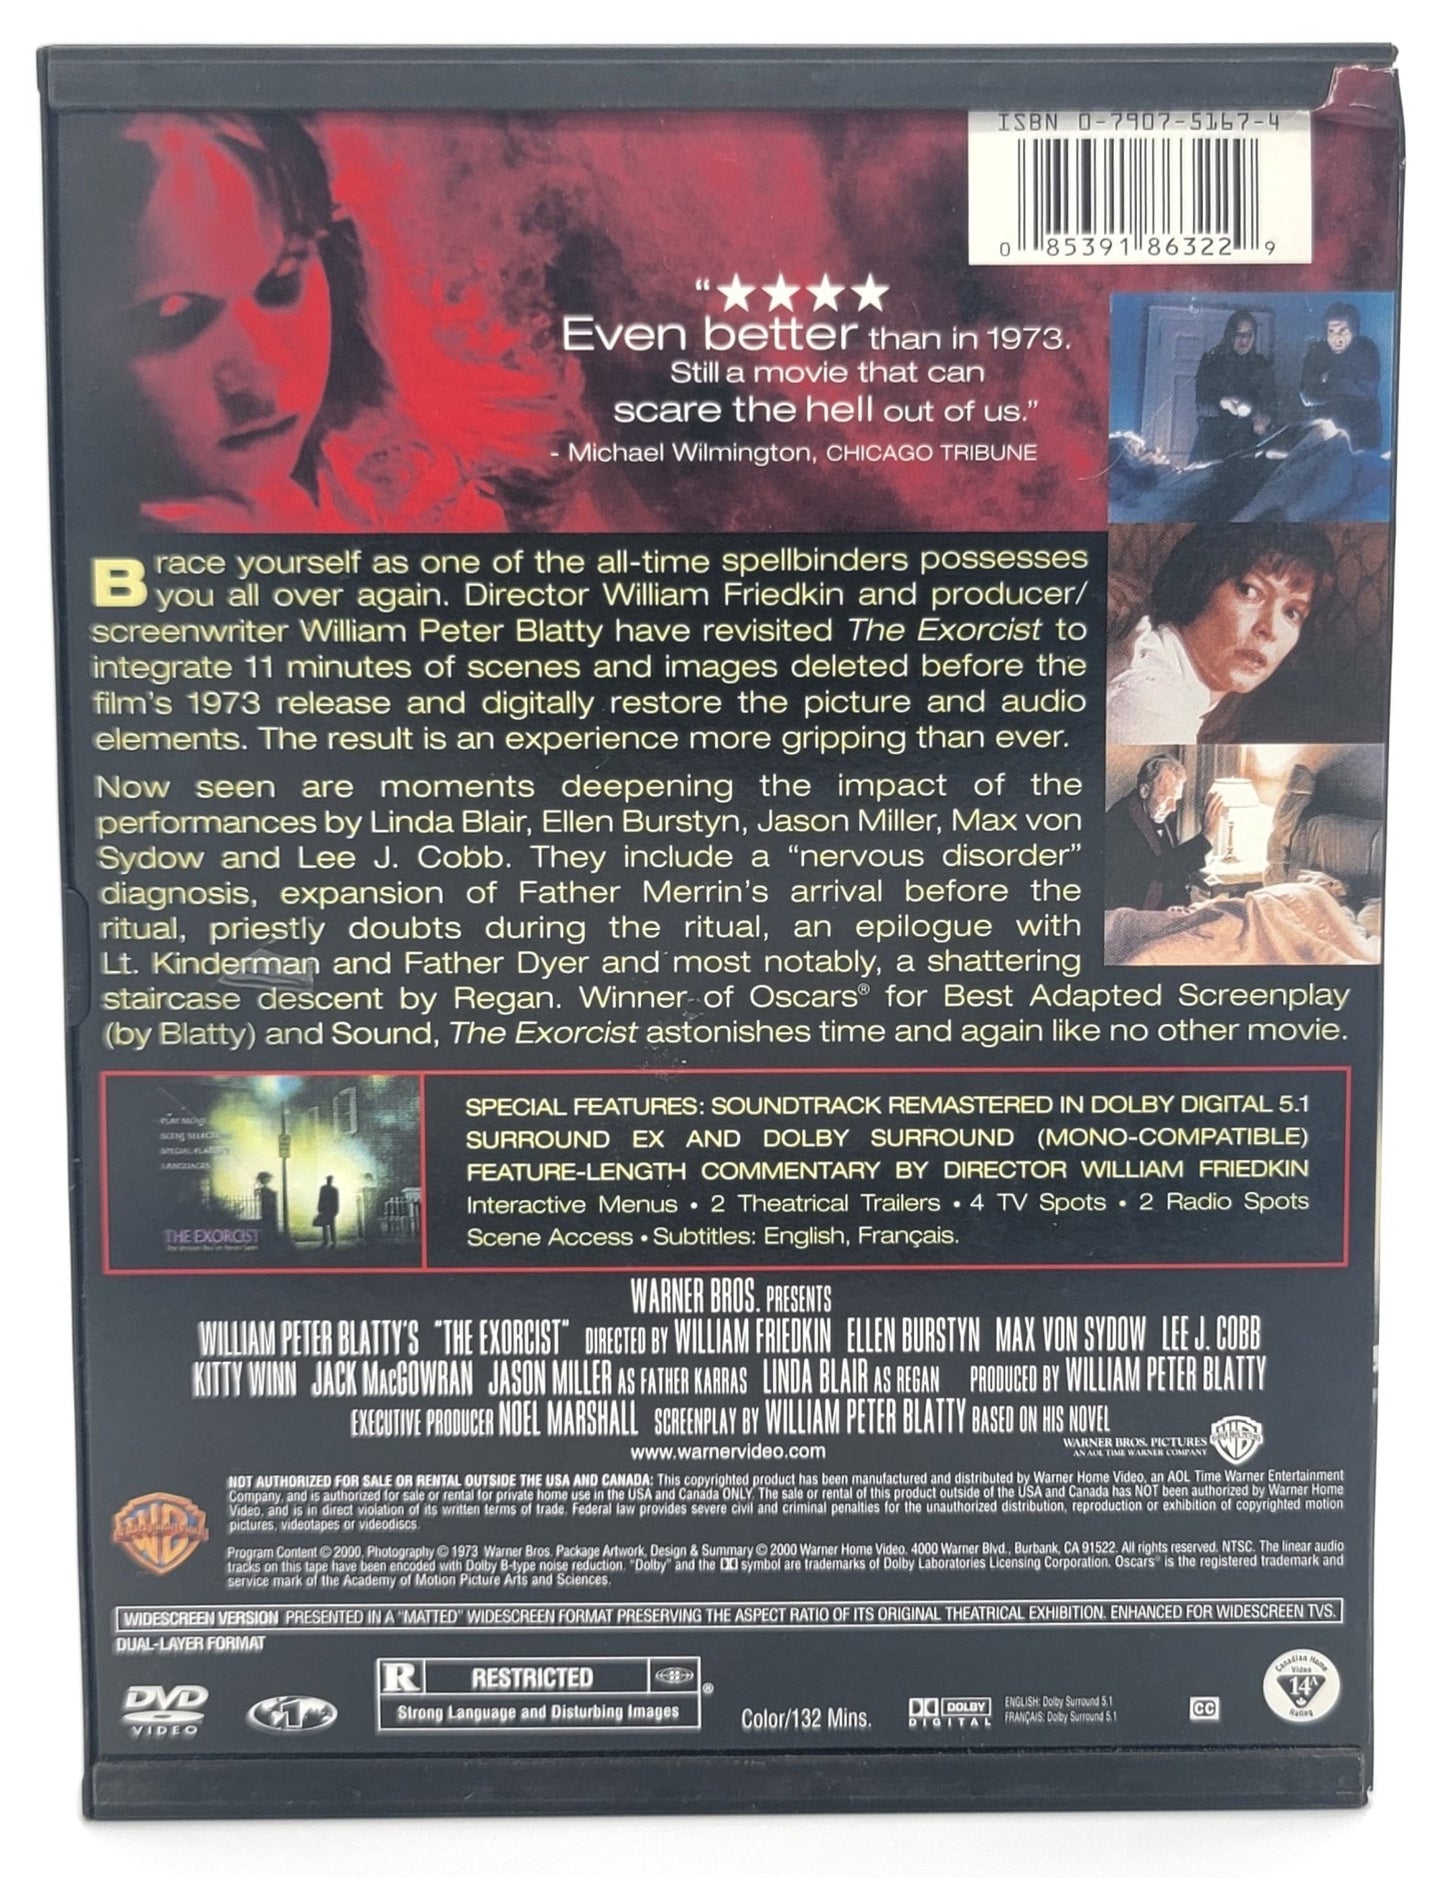 Warner Brothers - The Exorcist - The Version You've Never Seen | DVD | Widescreen - DVD - Steady Bunny Shop